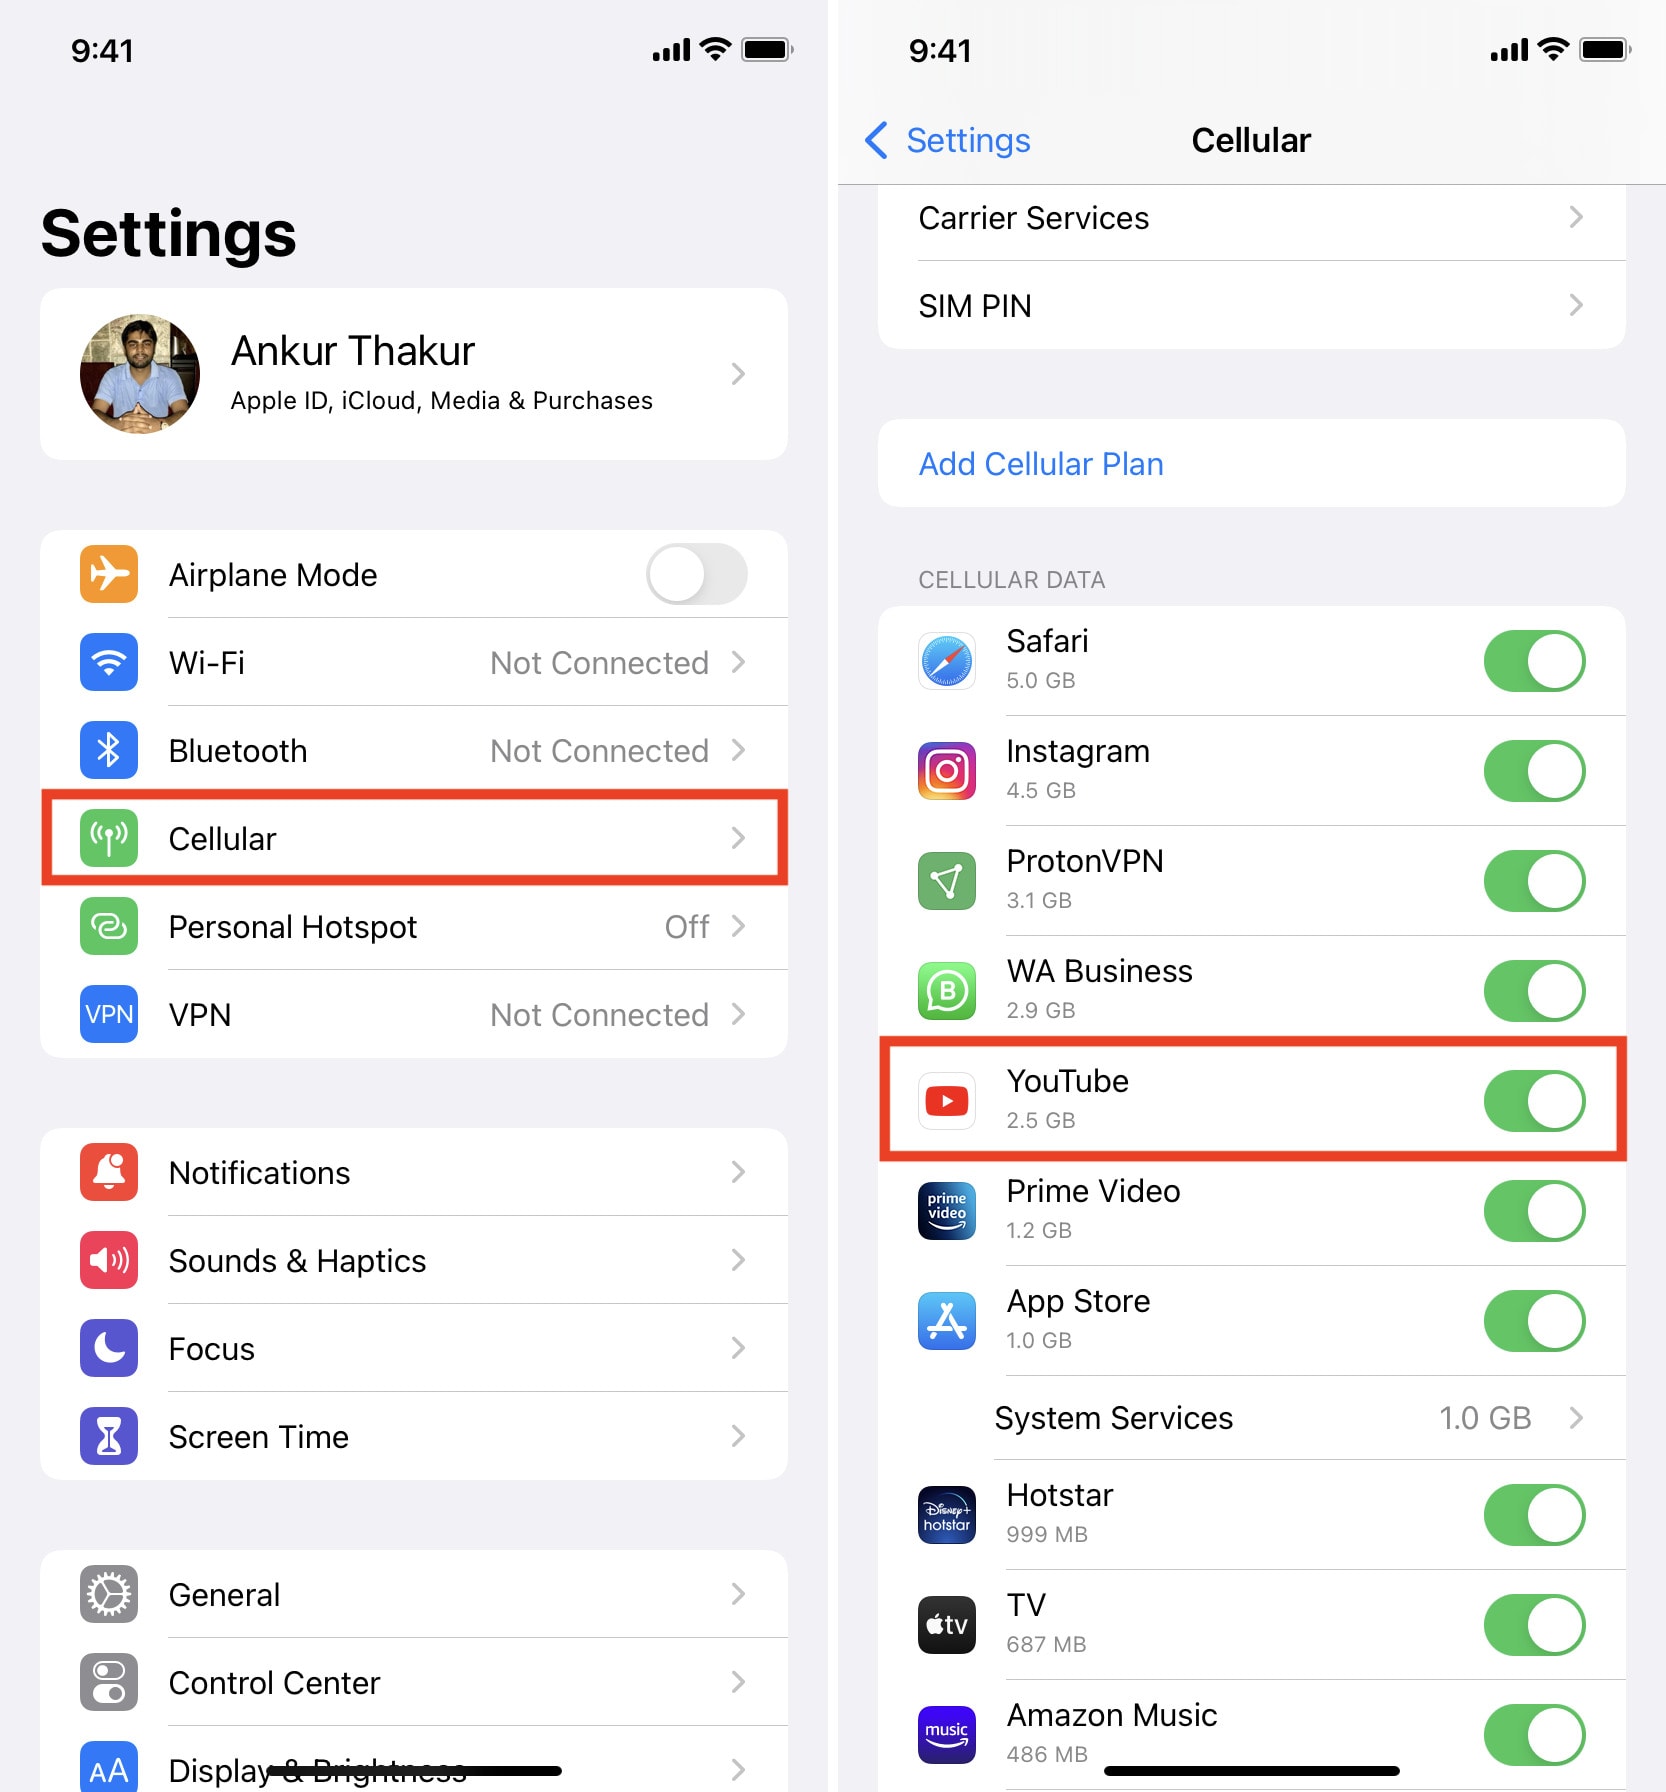 Cellular Data enabled for YouTube in iPhone settings